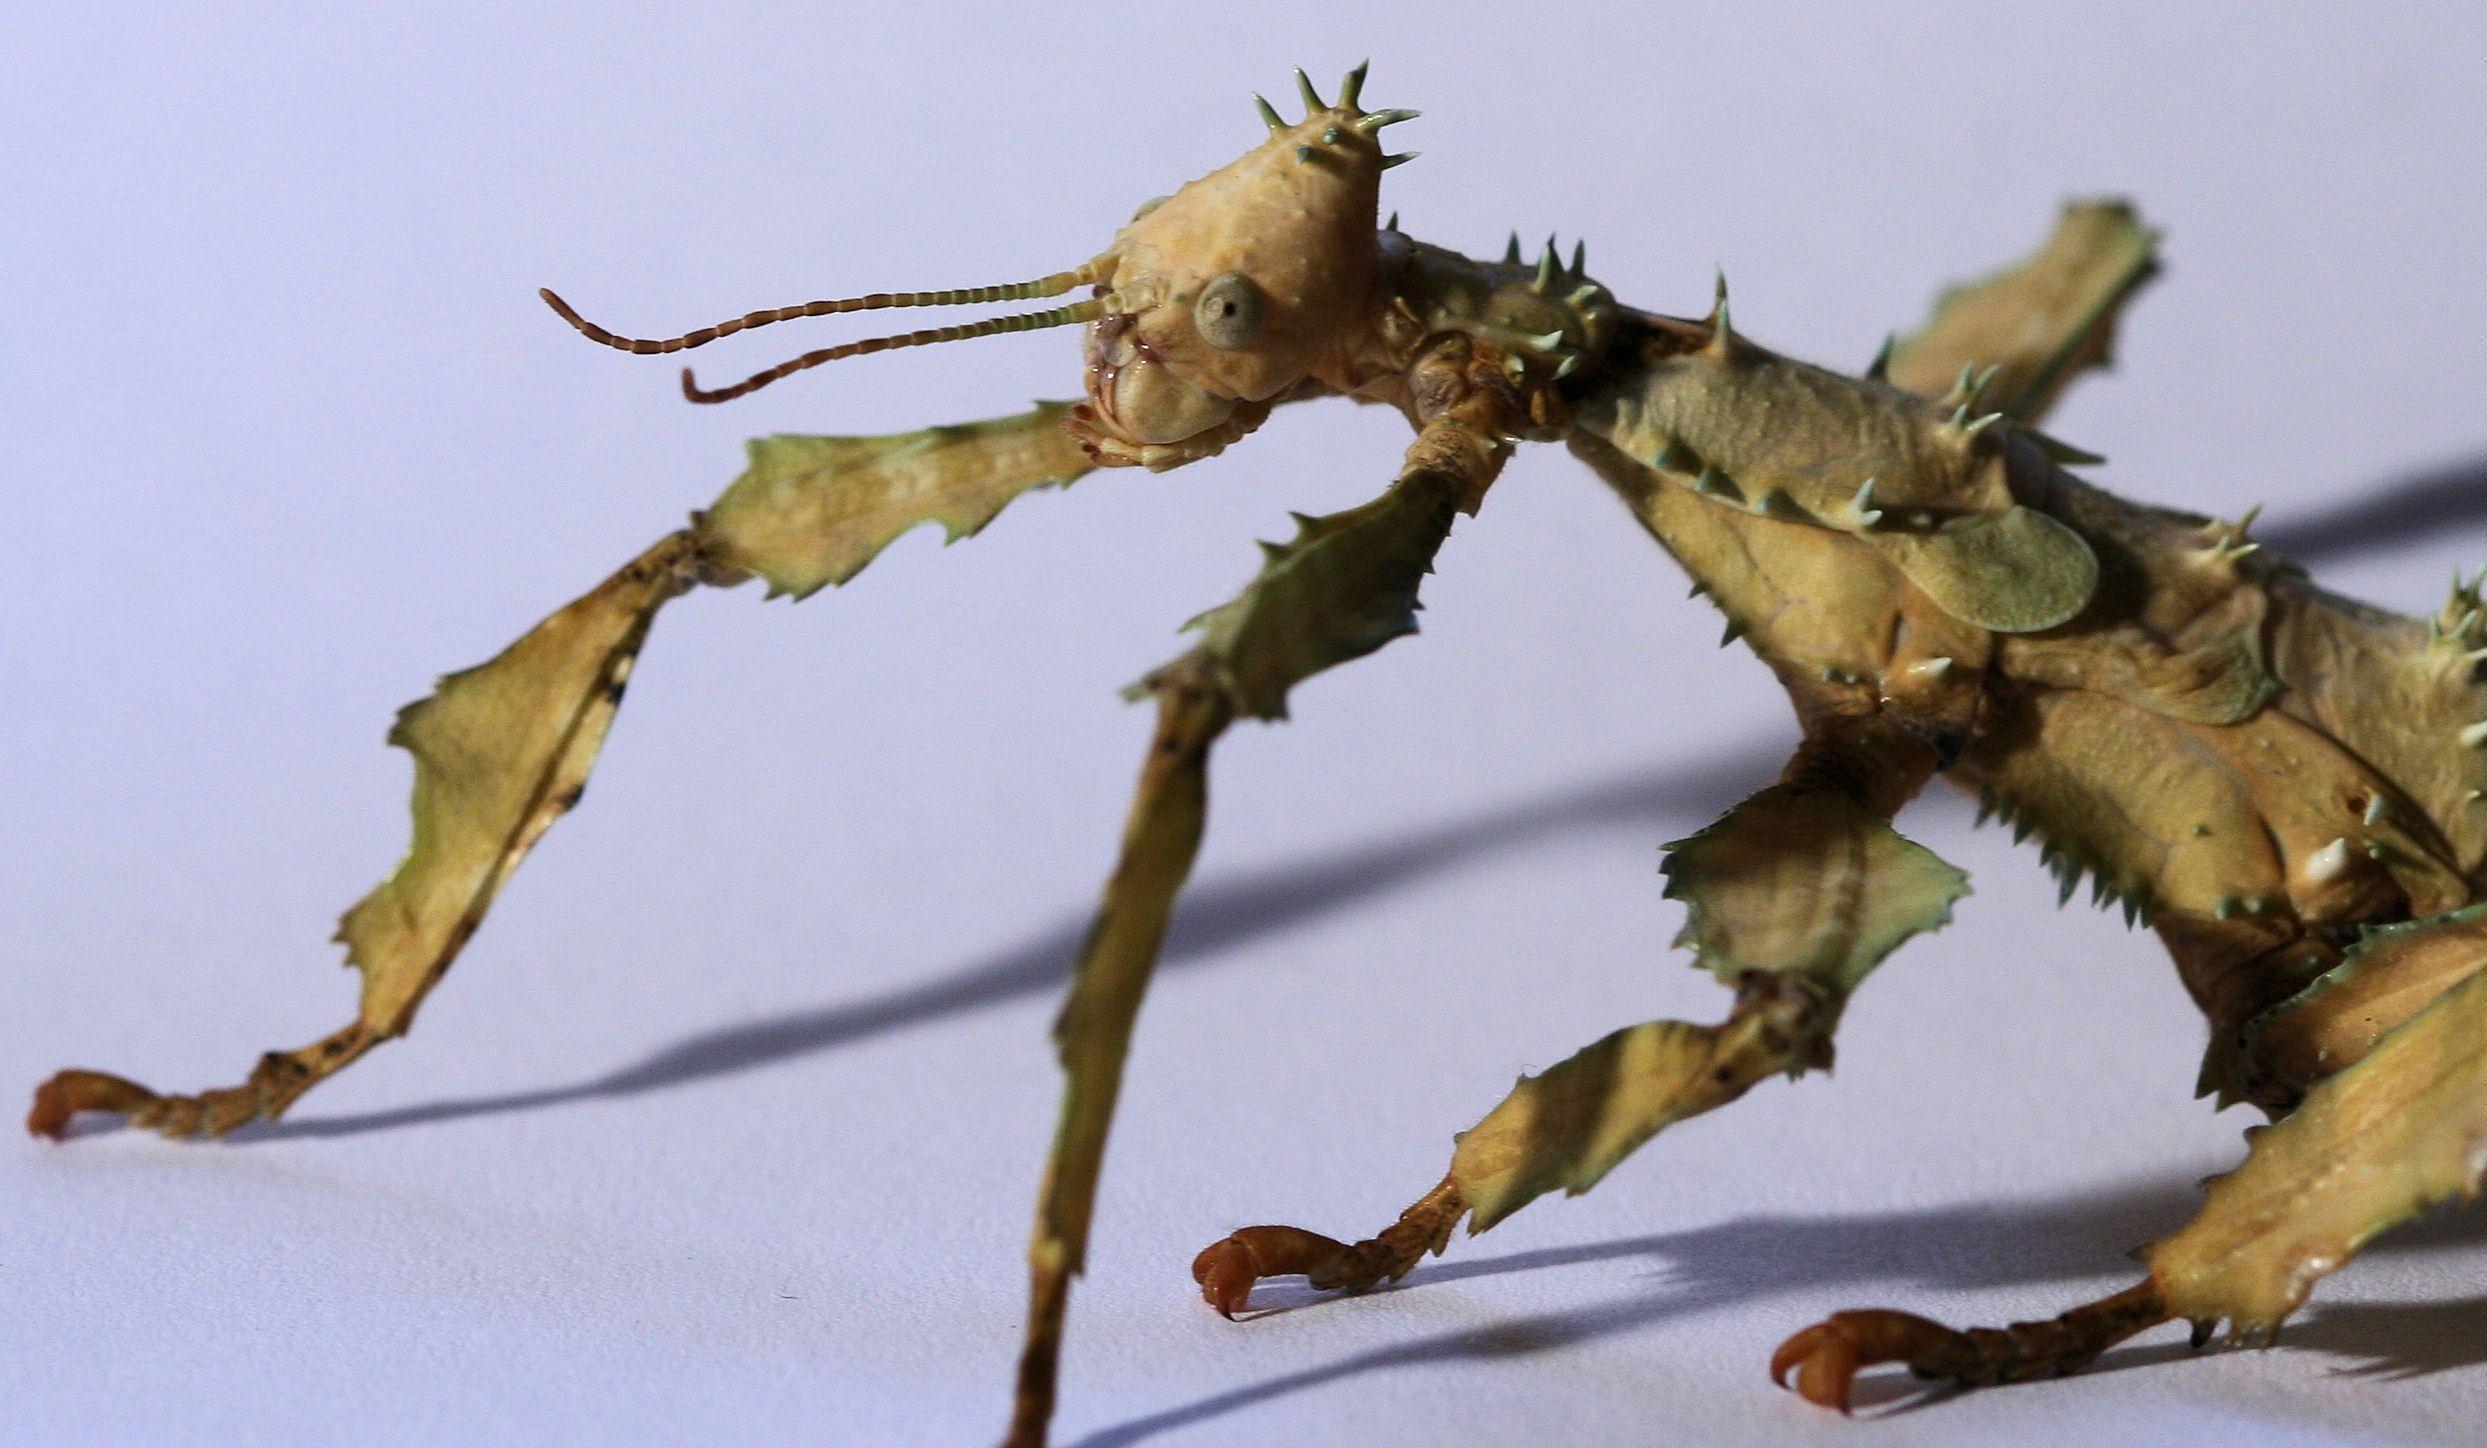 Giant Spiny Stick Insect Free HD Wallpaper Image Background